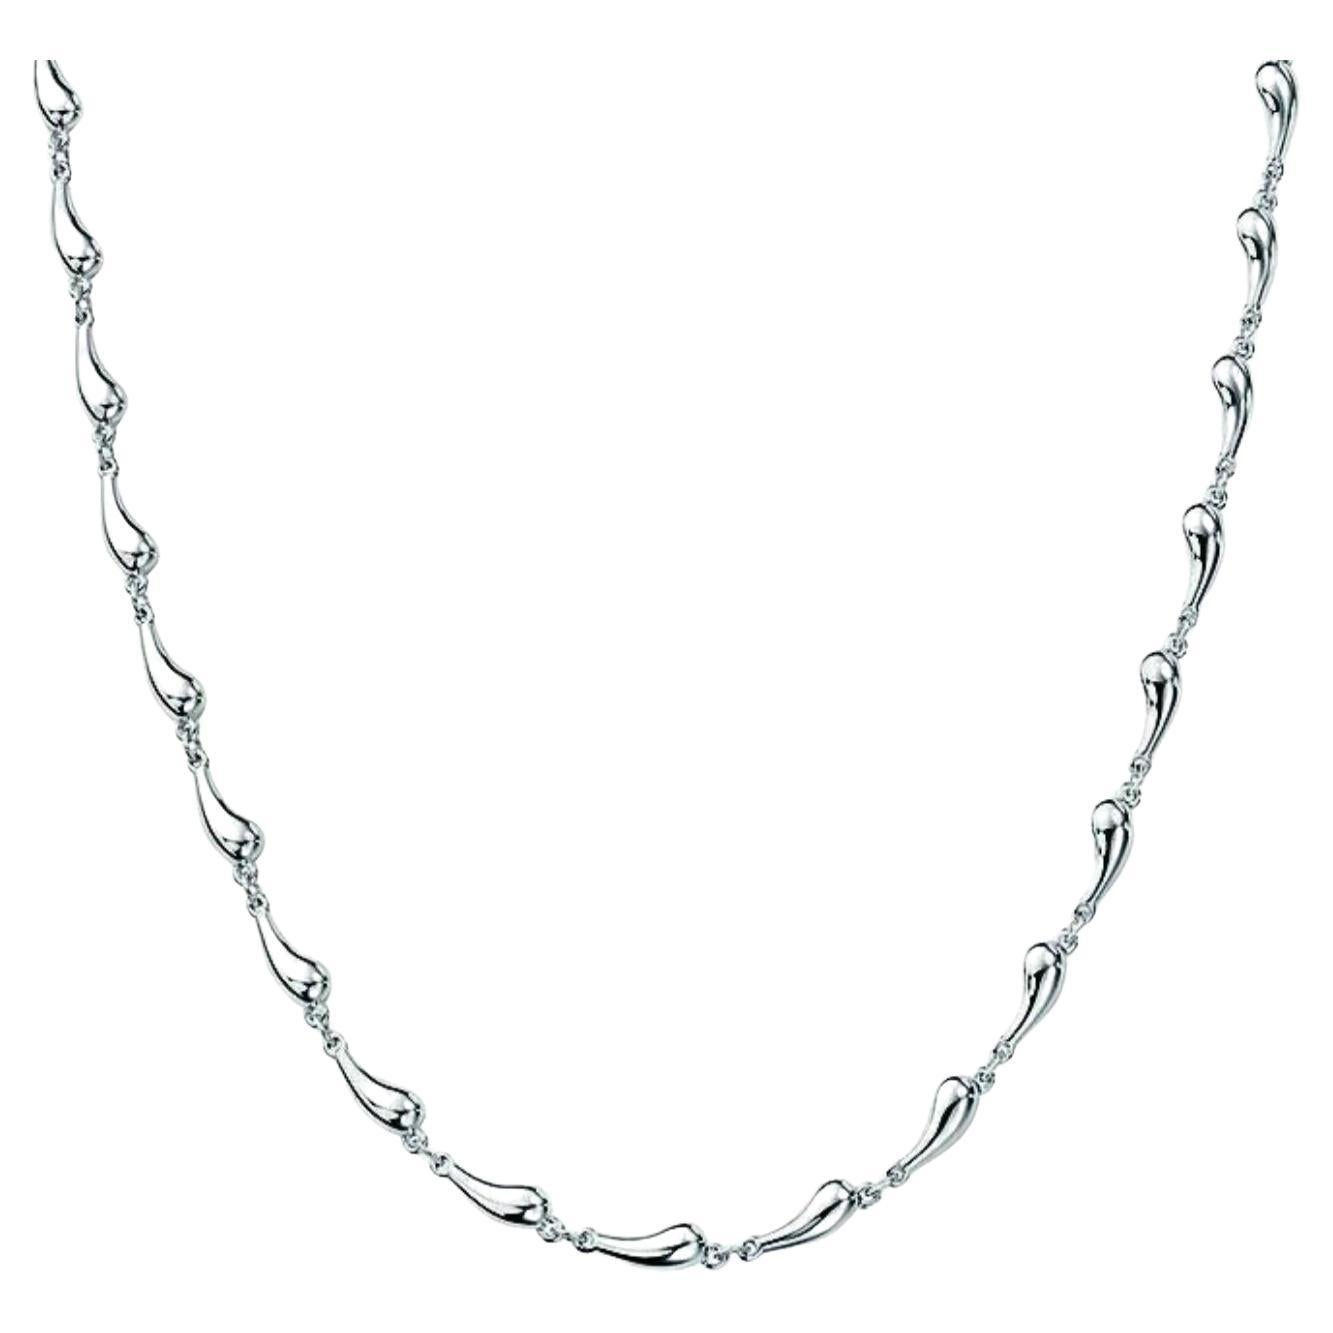 Tiffany & Co. Elsa Peretti Sterling Silver Teardrop Chain Link Necklace For Sale